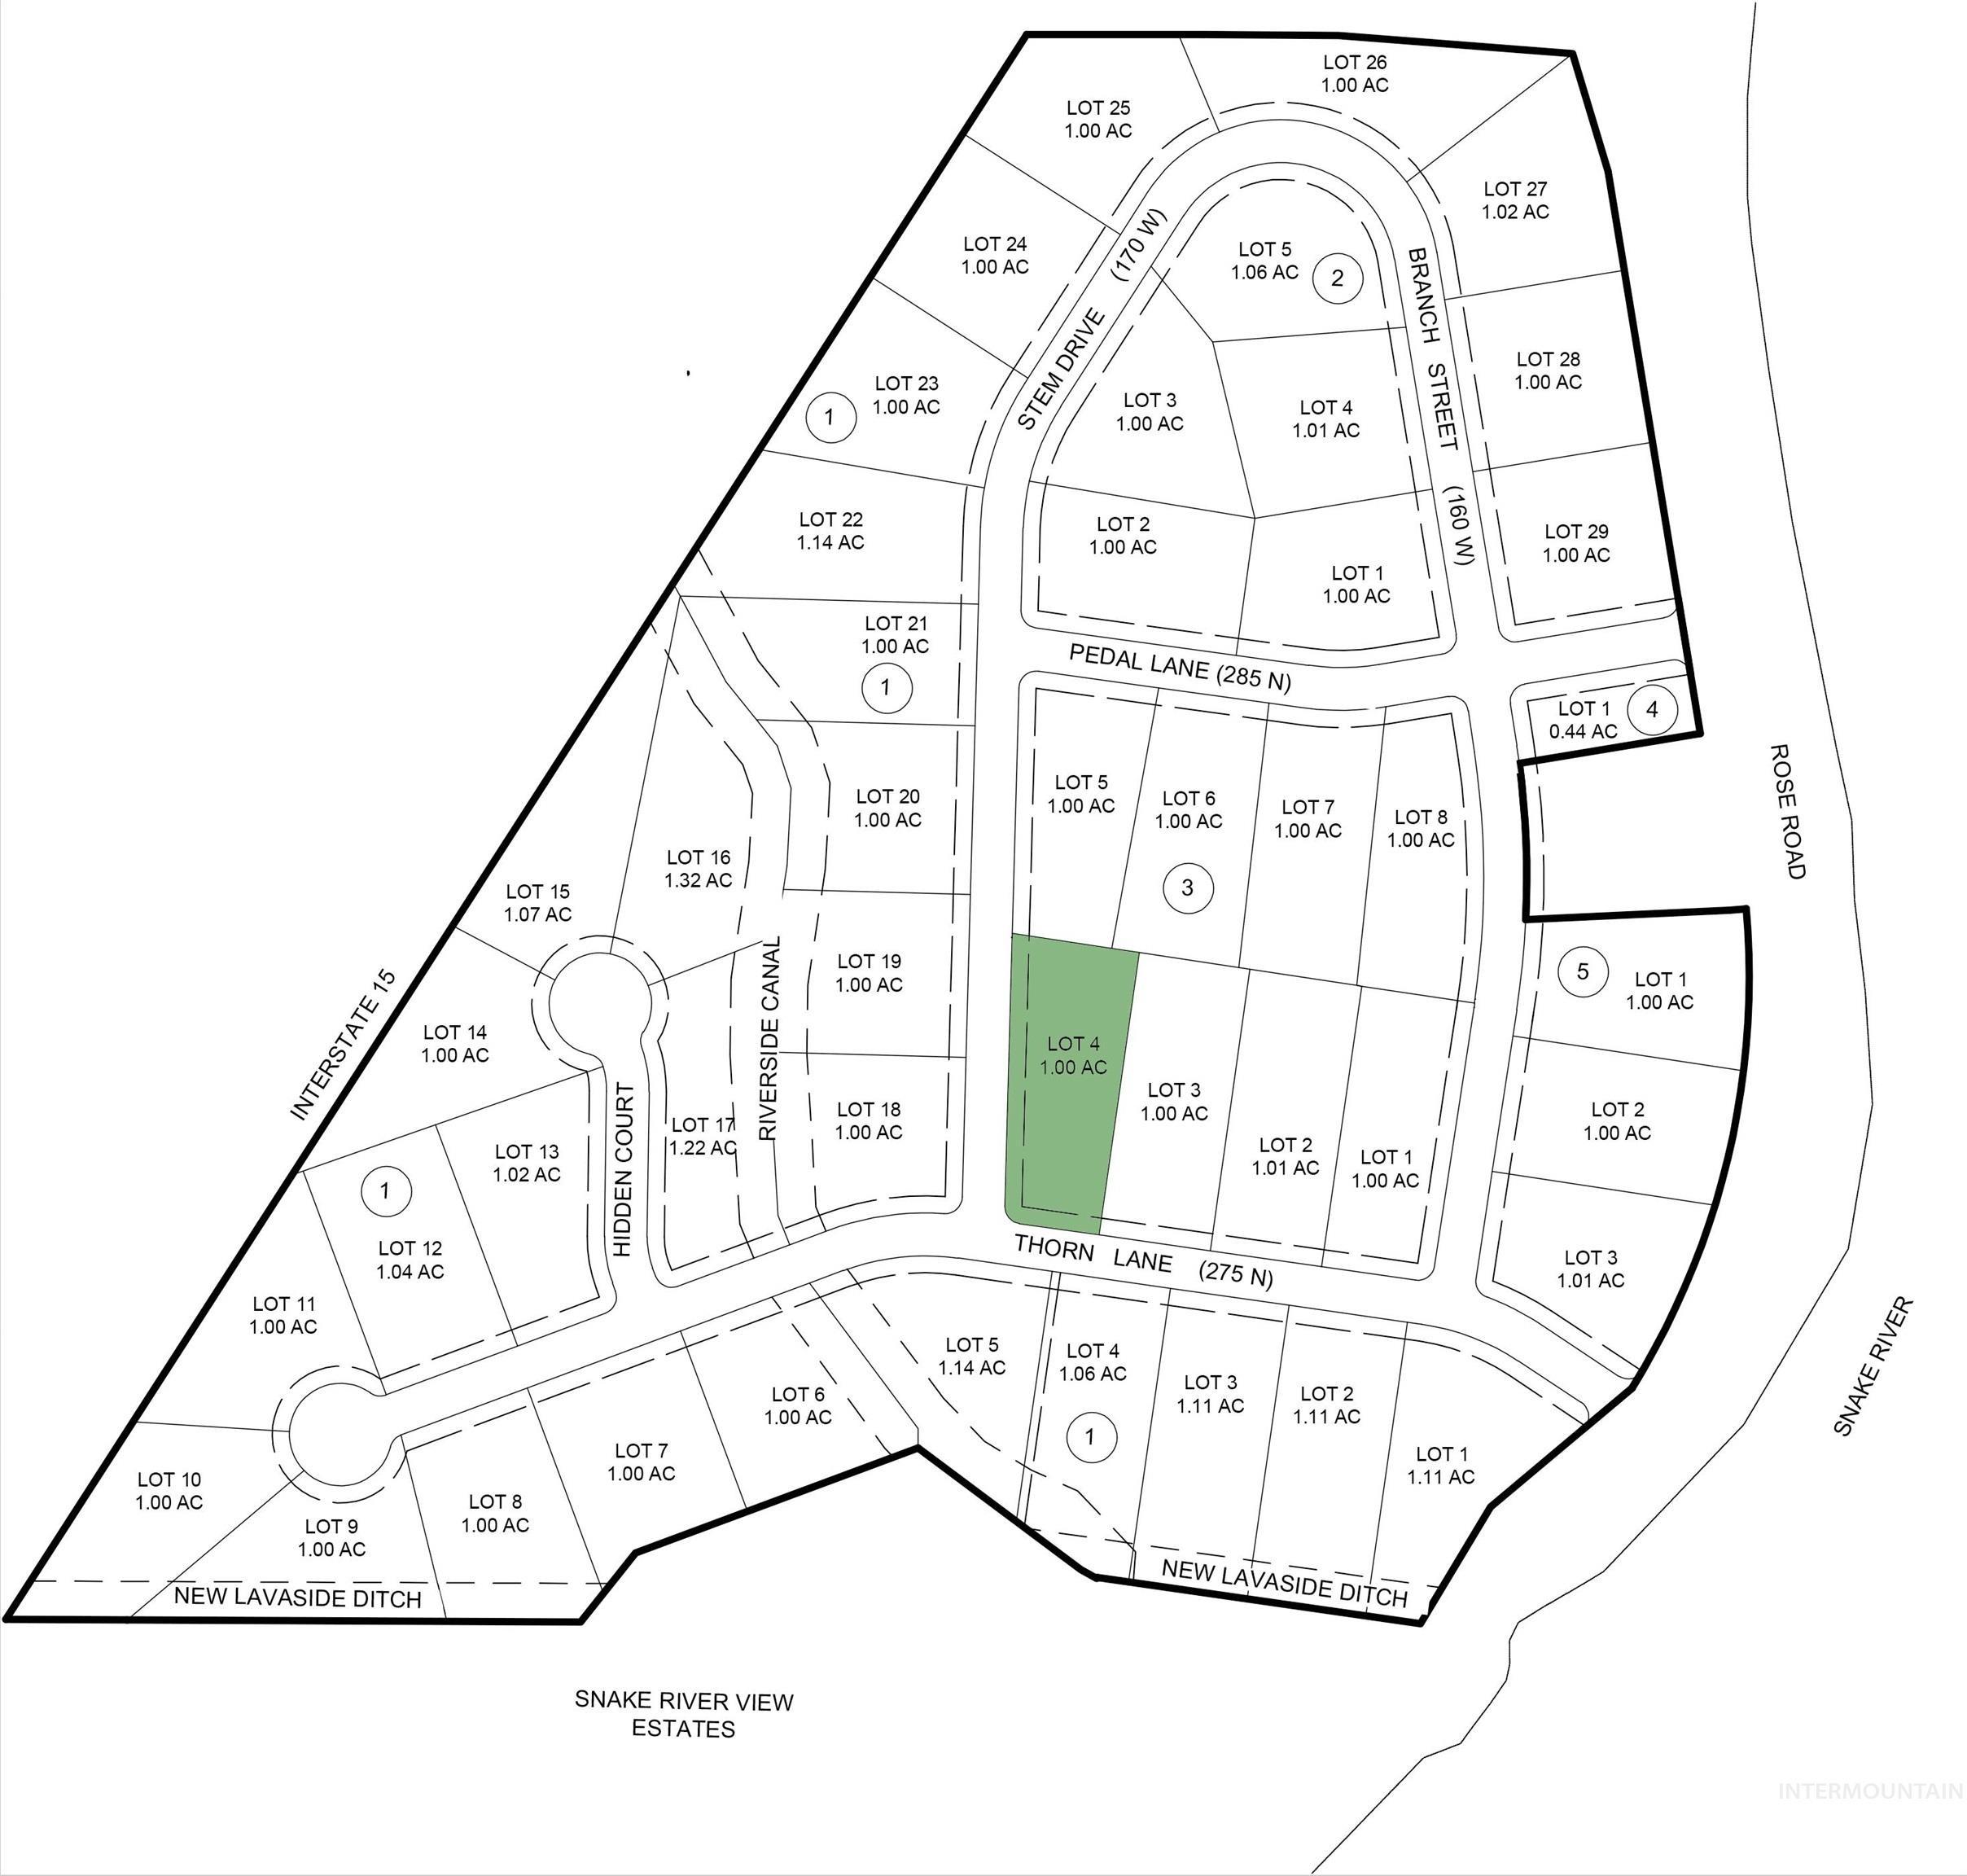 Property Image for Tbd Block 3 Lot 4